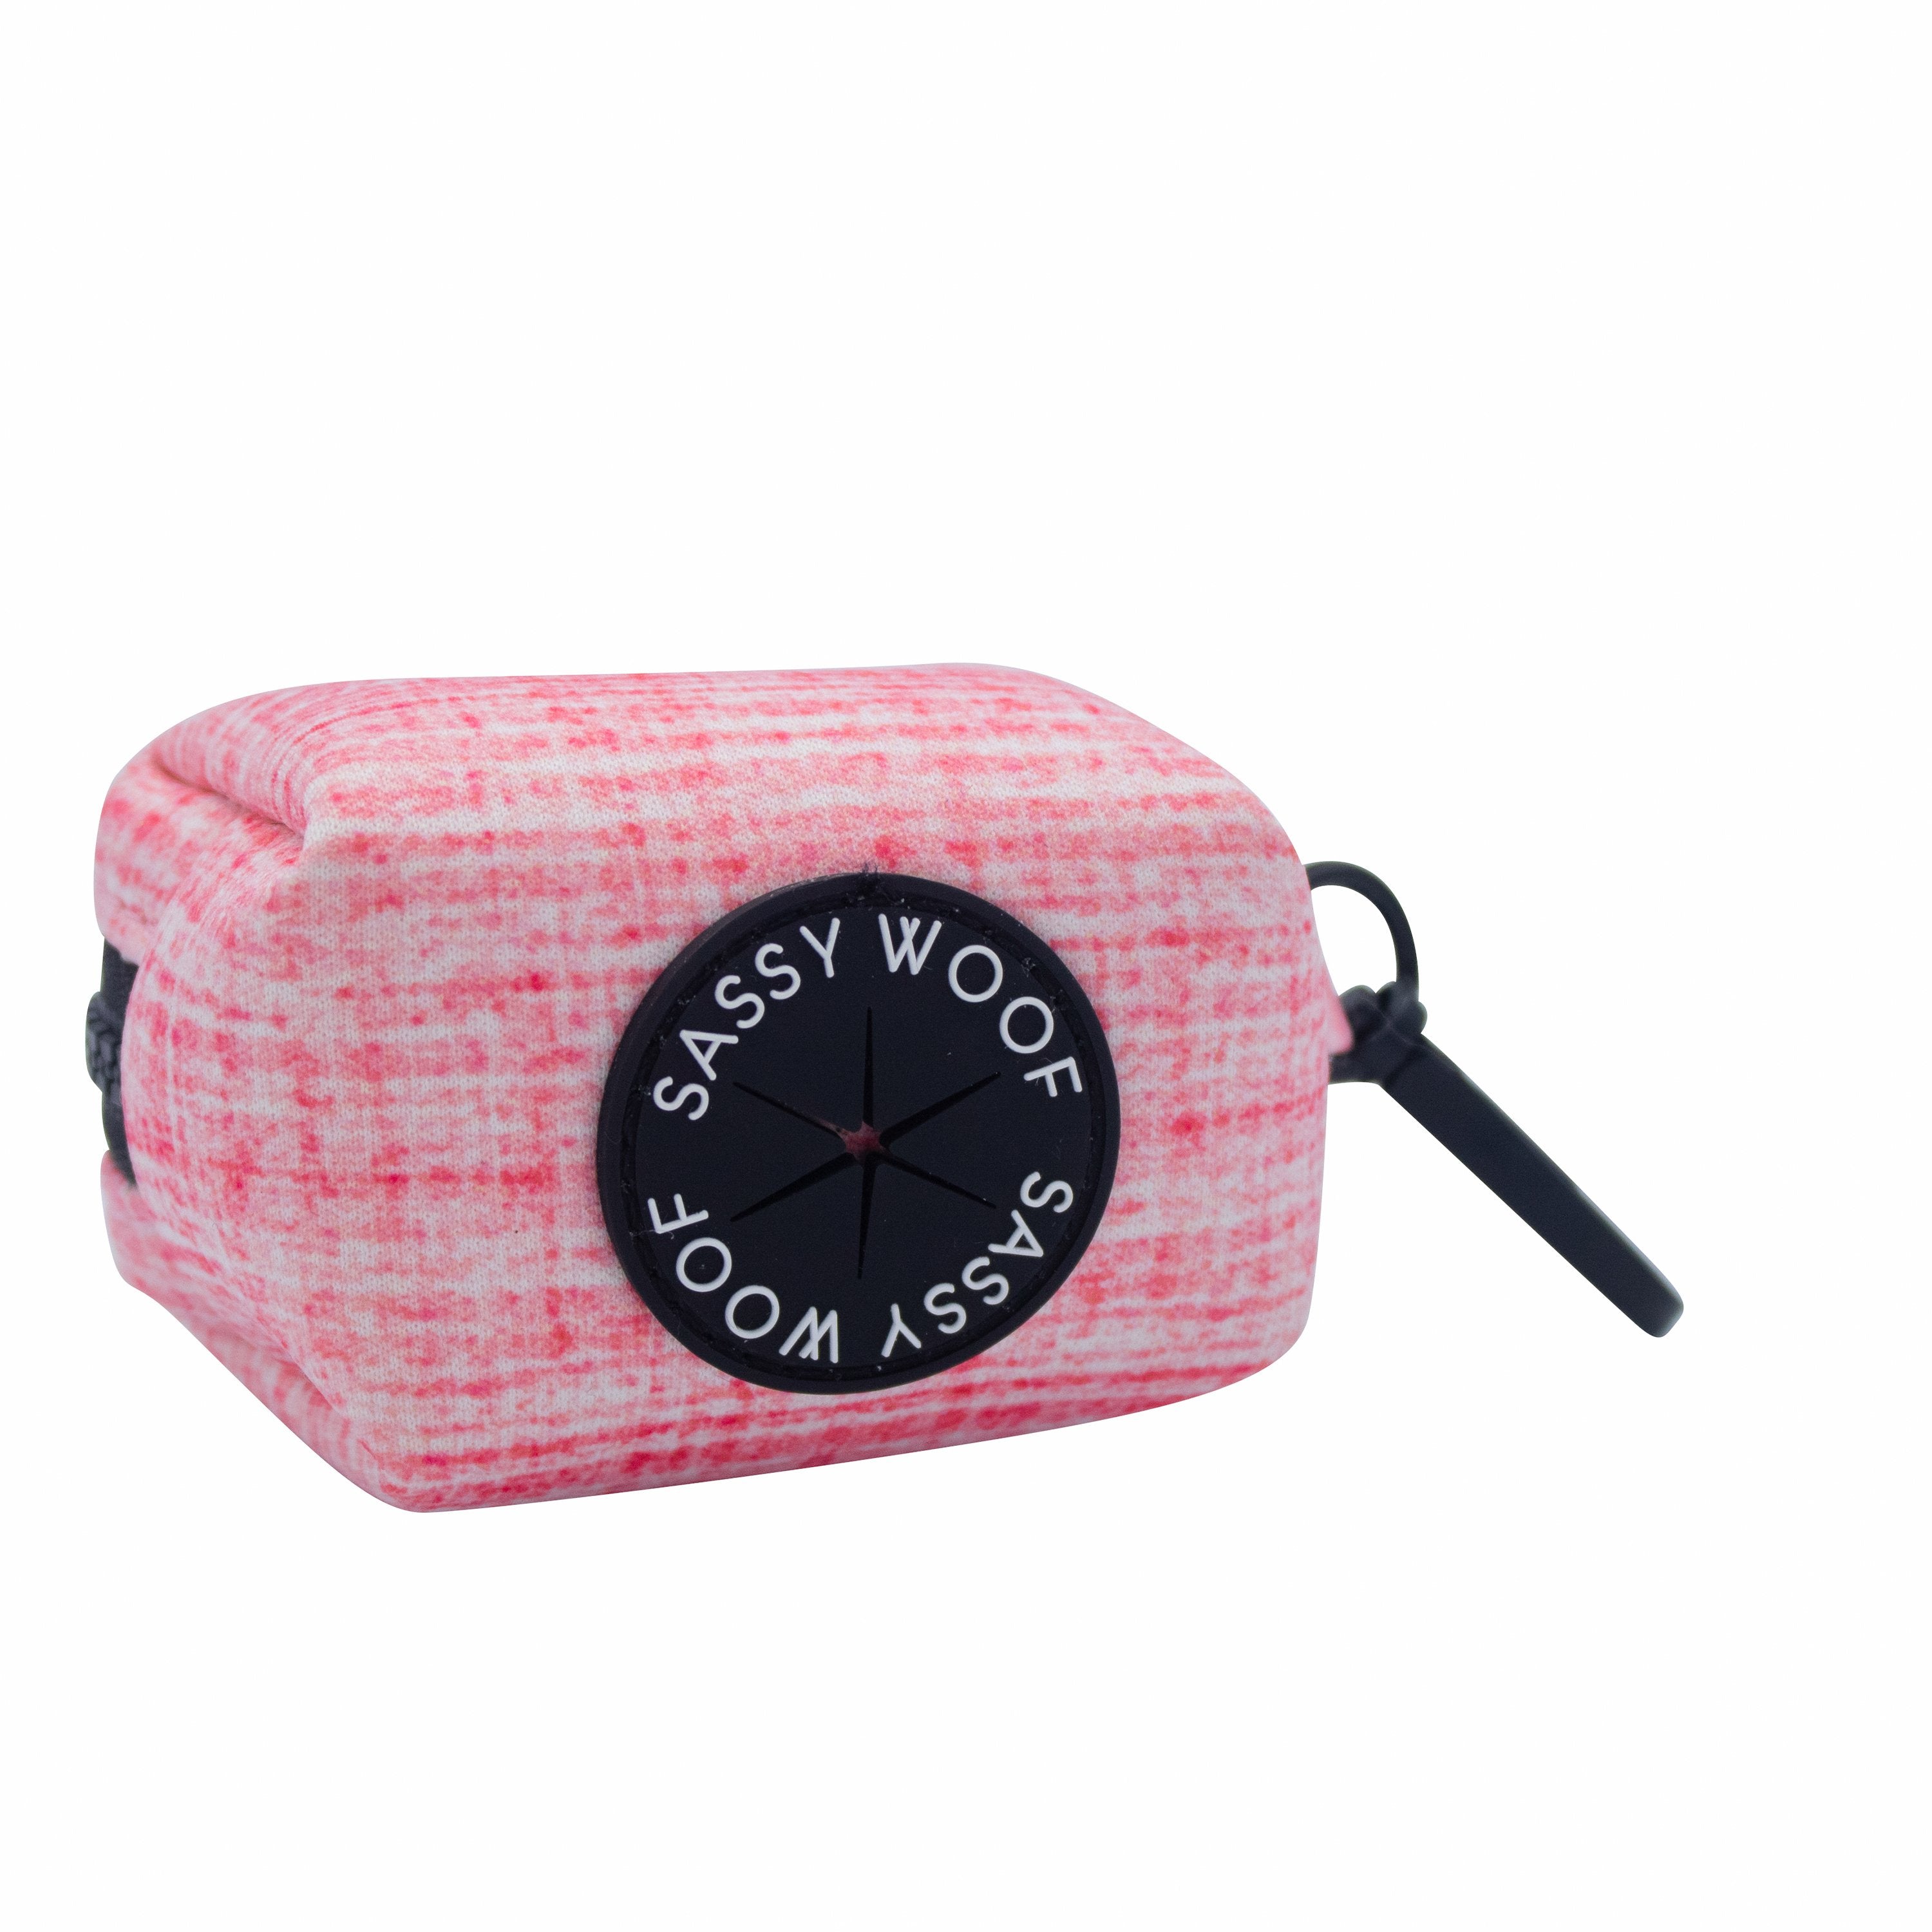 Pet Boutique - Dog Accessories - Rose Waste Bag Holder by Sassy Woof